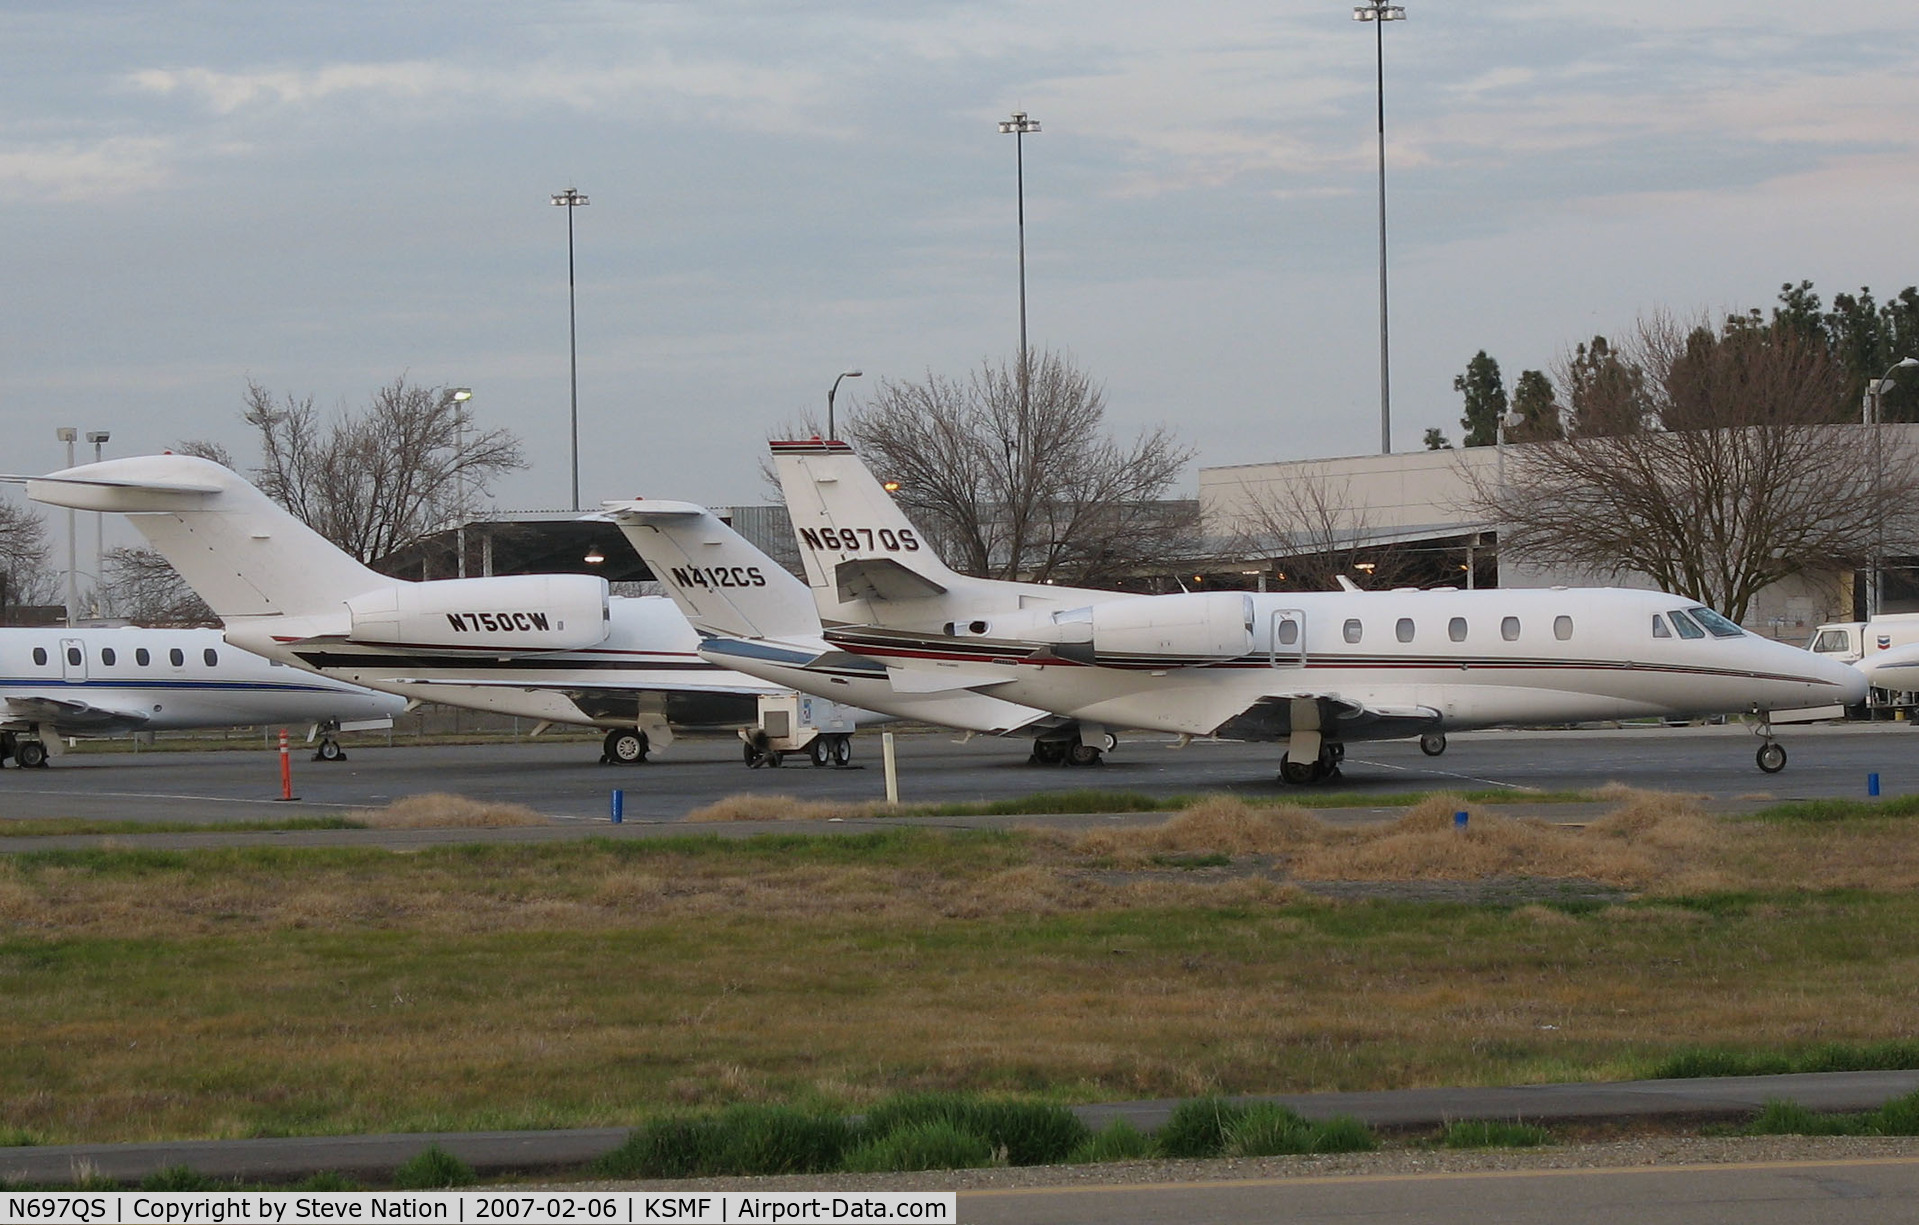 N697QS, 2001 Cessna 560XL Citation Excel C/N 560-5197, Netjets 2001 Cessna 560XL on Cessna Citation Center ramp @ Sacramento International Airport, CA (to N697SD DS Advisors, Chicago, IL 2016-03-09)